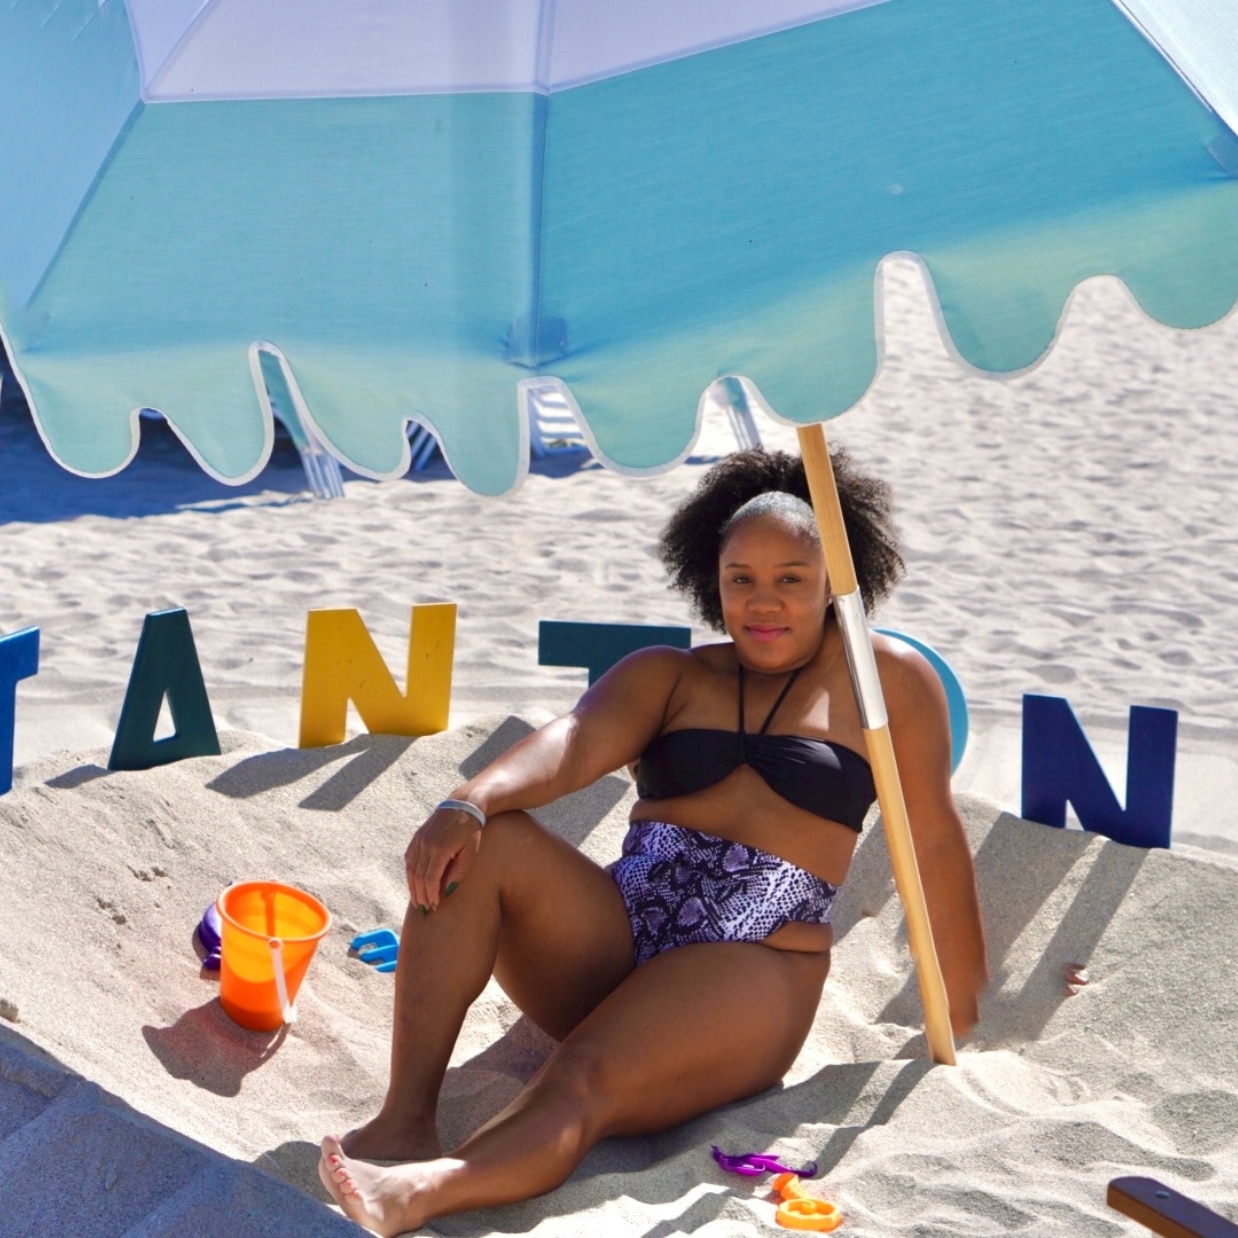 Me enjoying the beautiful Miami beaches at the Stanton Hotel during our most recent Miami itinerary